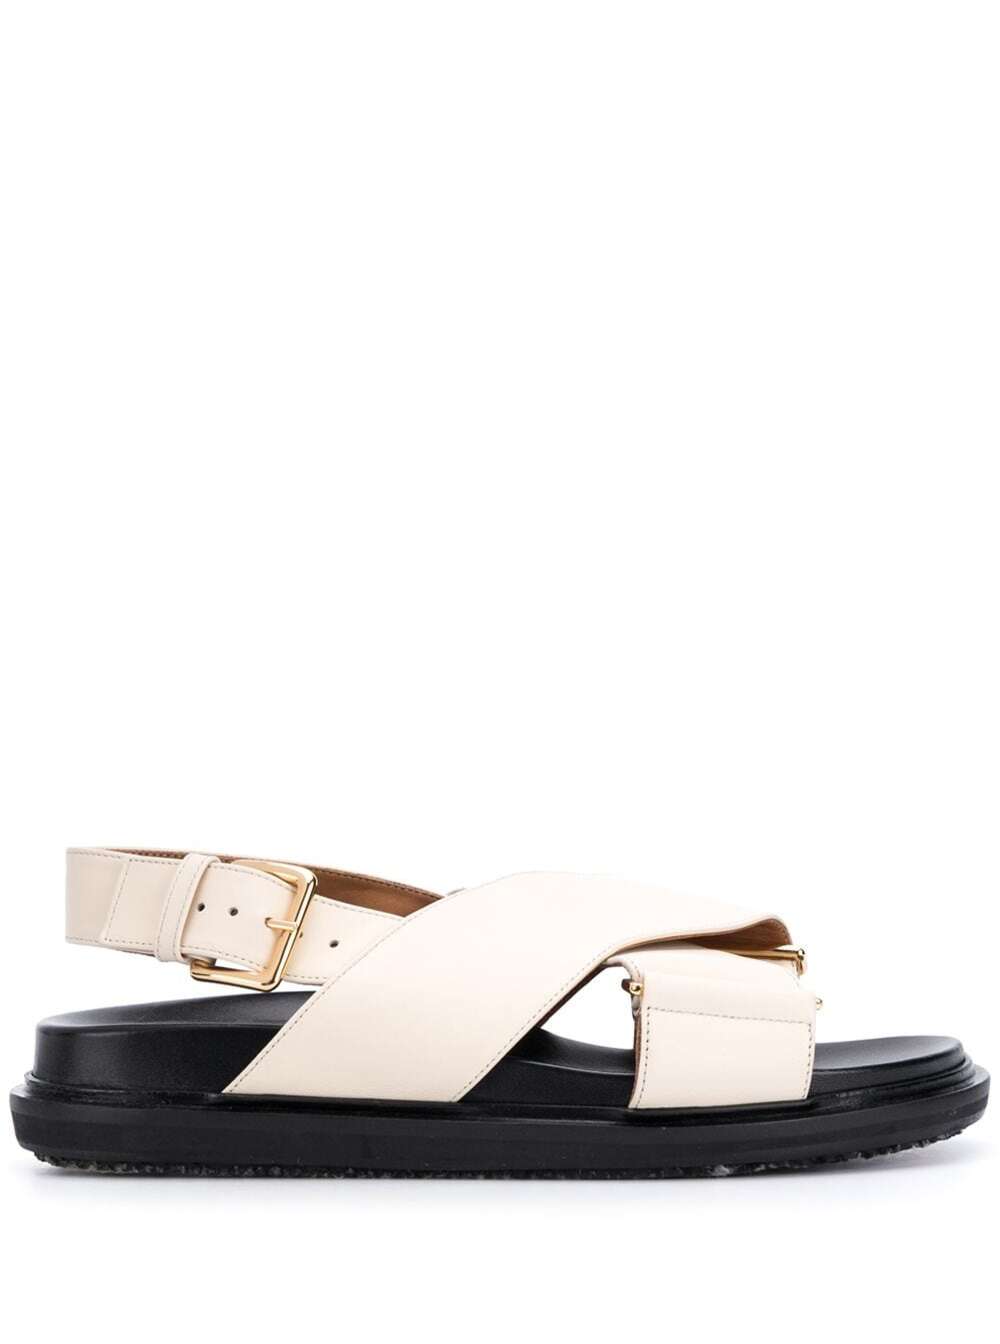 Marni White Leather Sandals With Crossed Bands